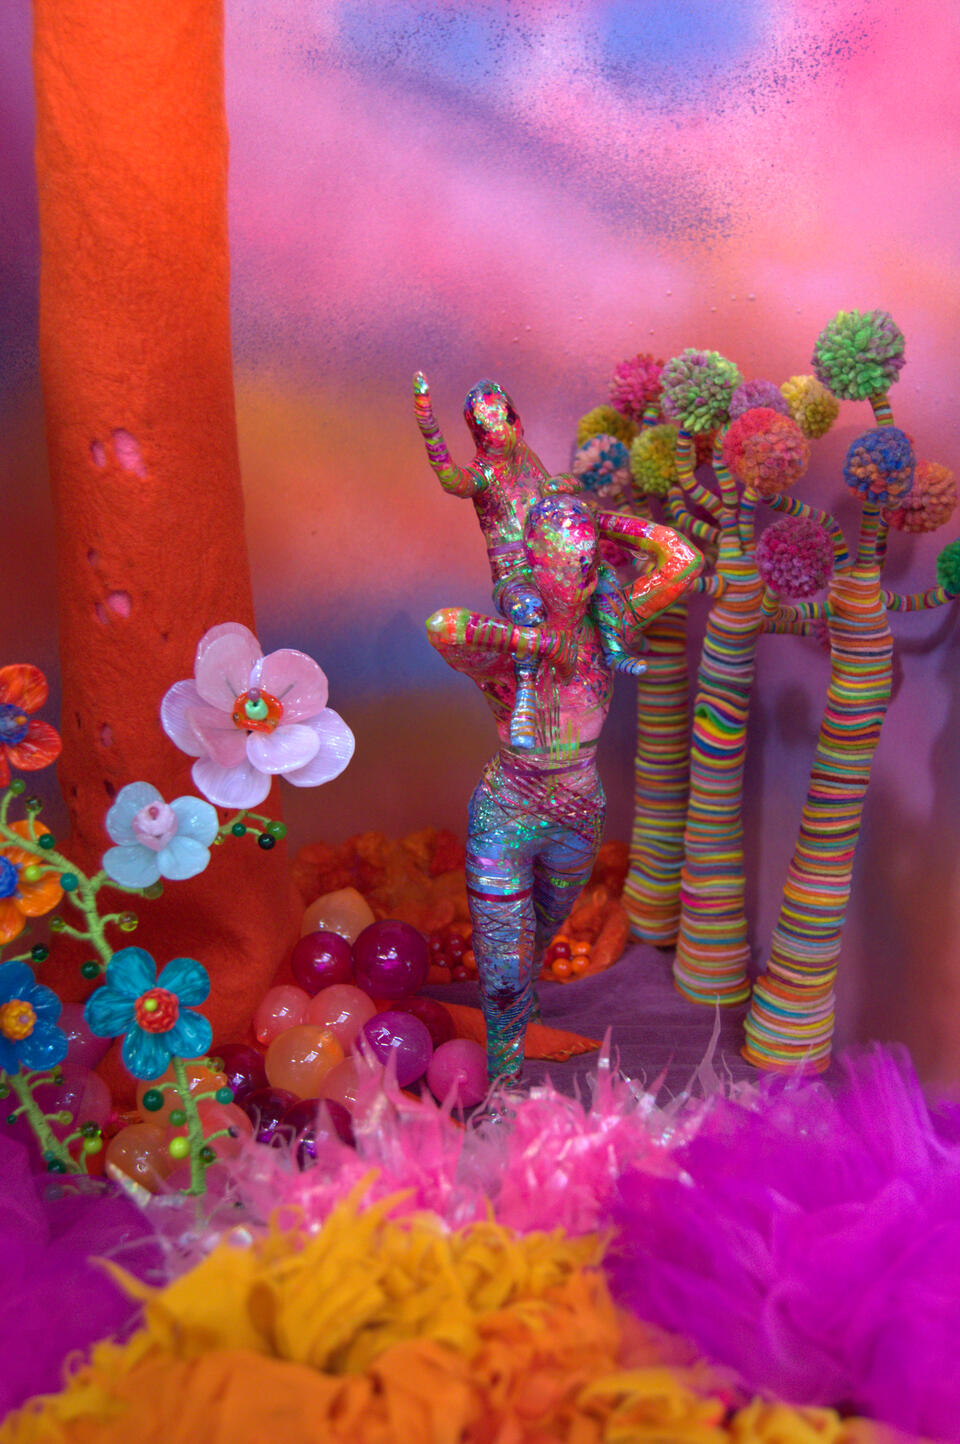 A colorful, glittering child sits atop the shoulders of a similarly colored adult as they walk through a fantasy forest with striped wool trees and large glass flowers